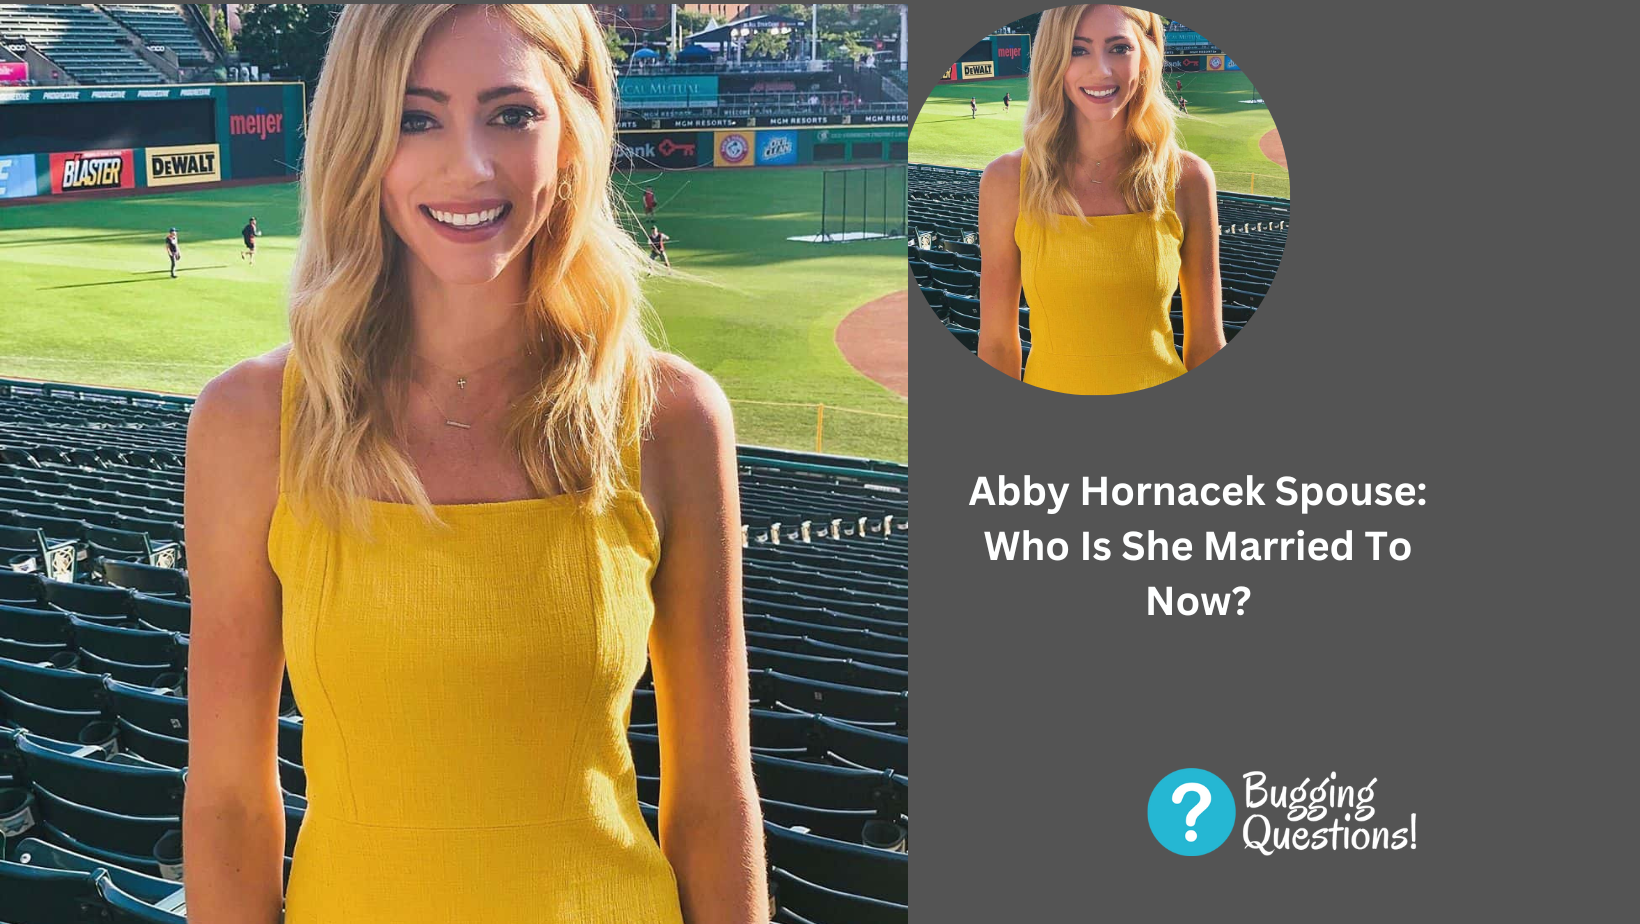 Abby Hornacek Spouse: Who Is She Married To Now?